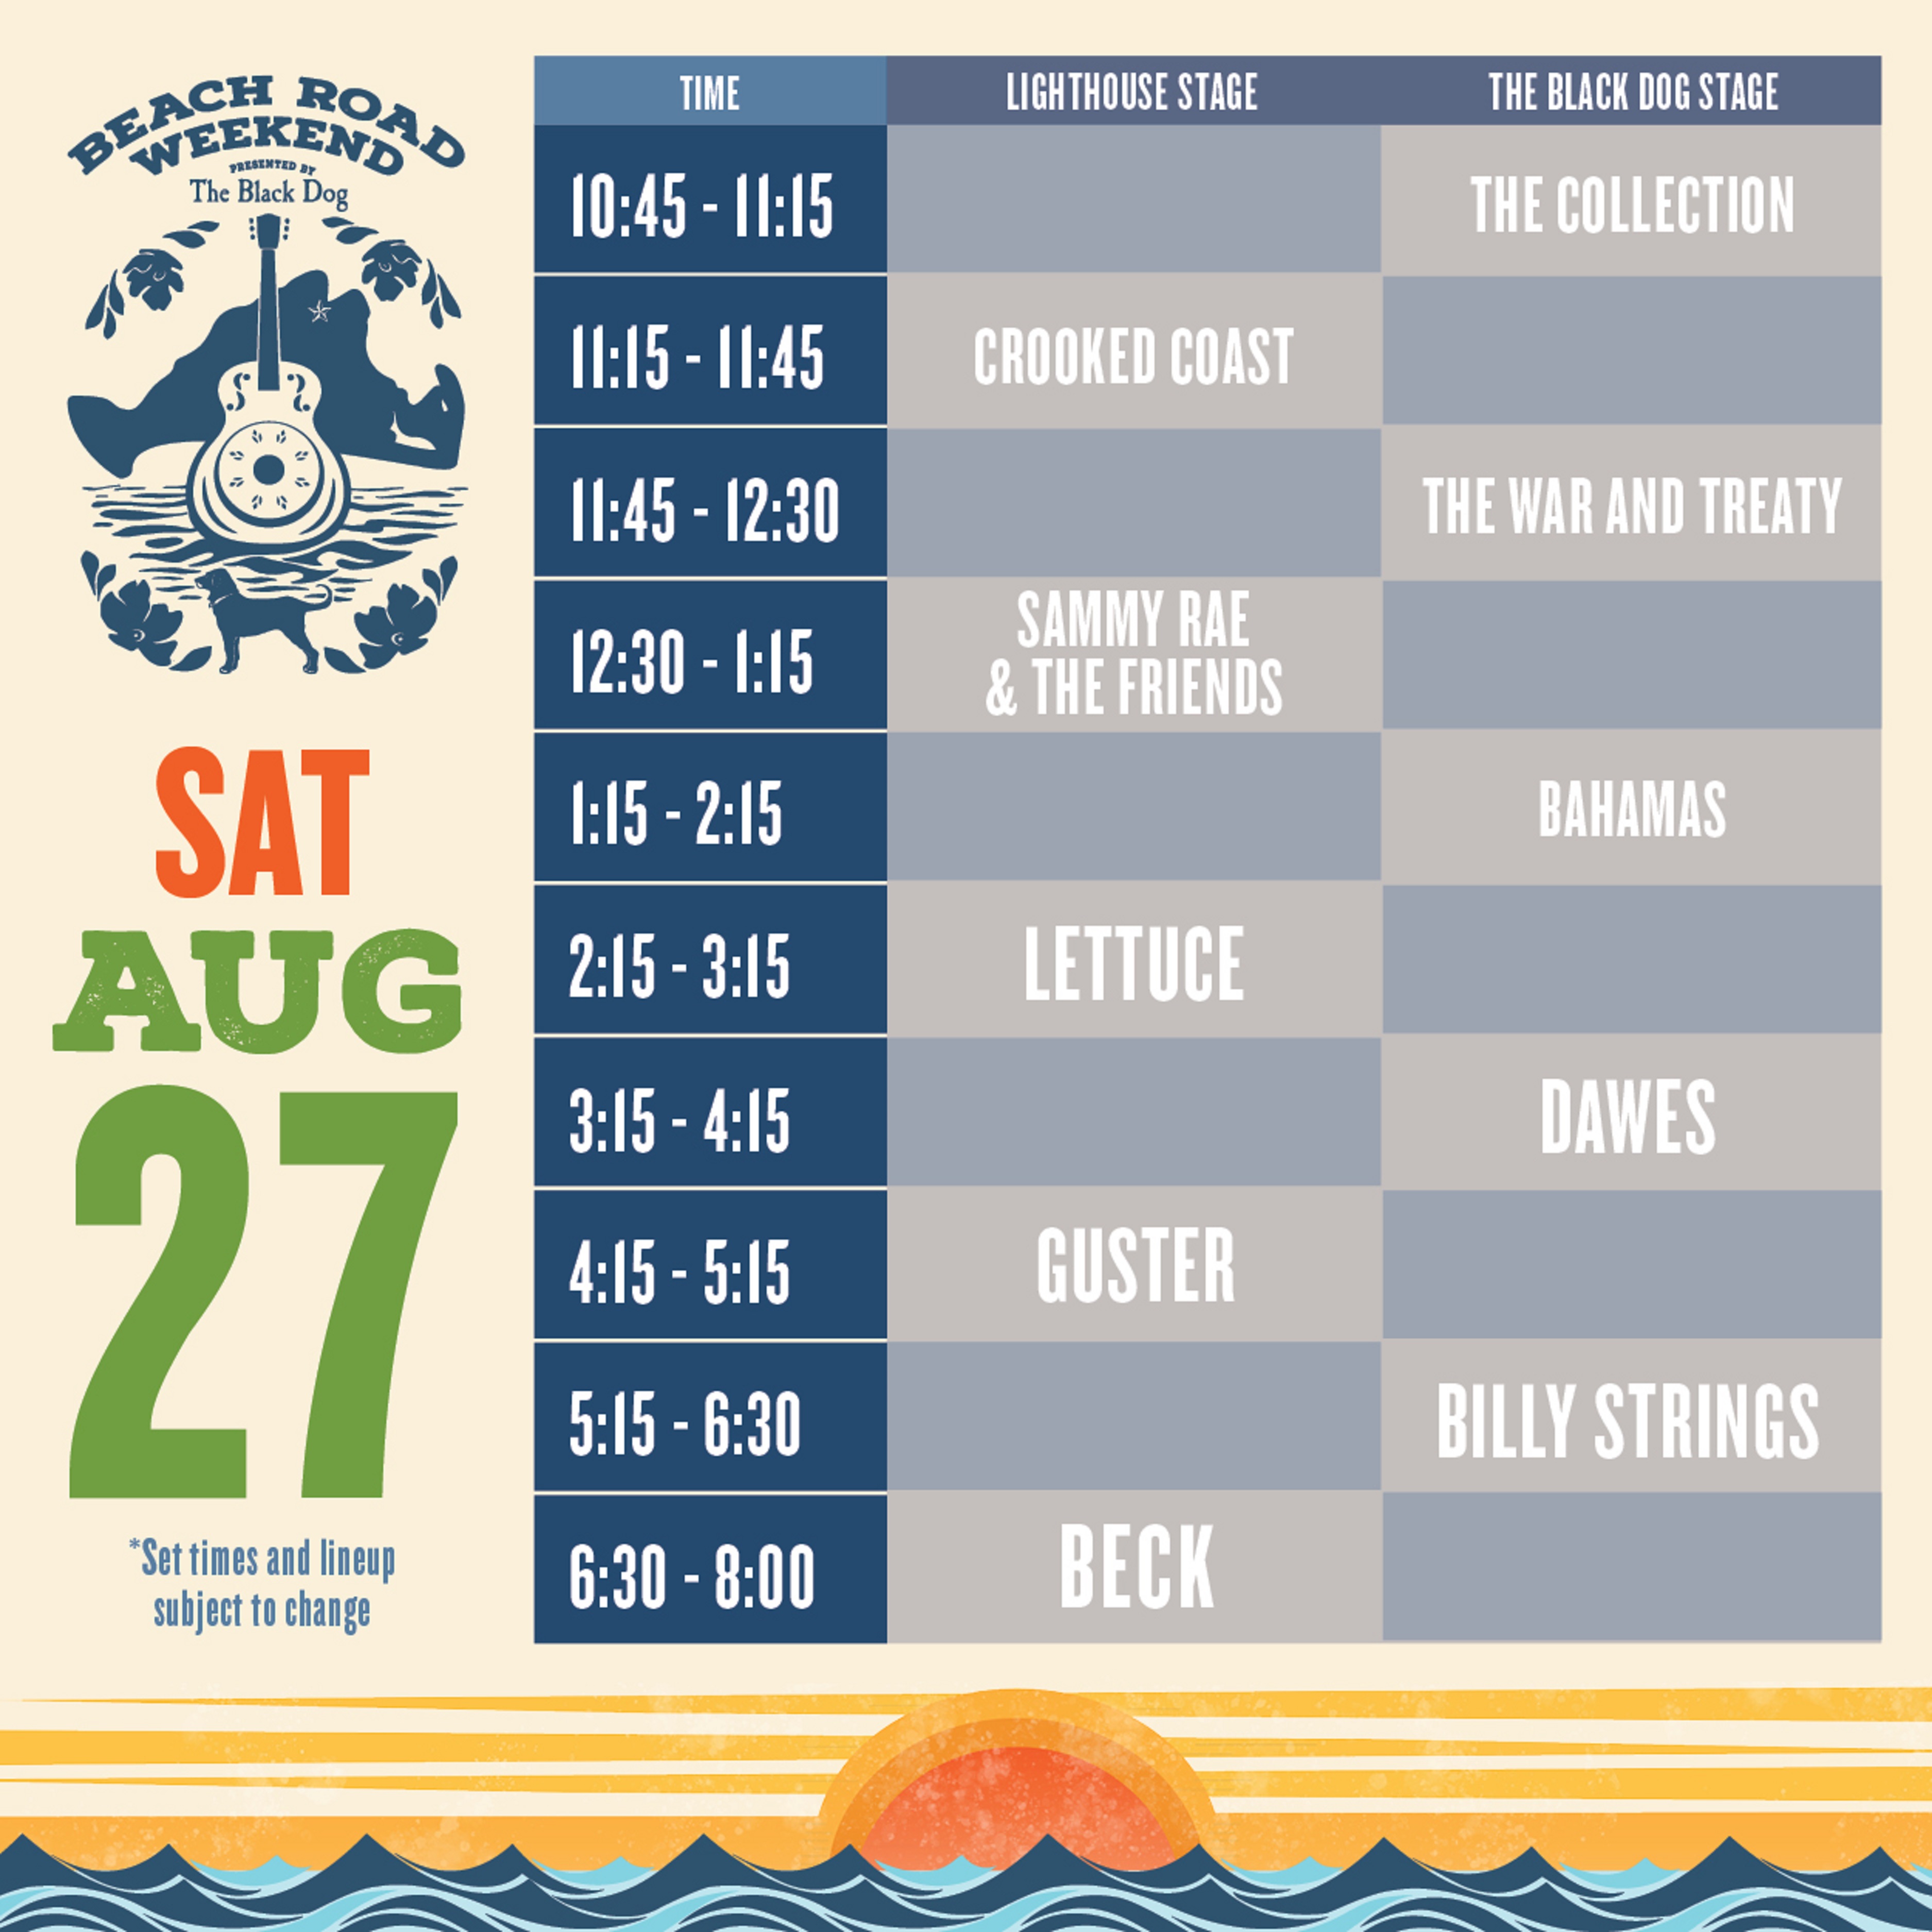 Beach Road Weekend Presented by the Black Dog Announces Daily Schedule